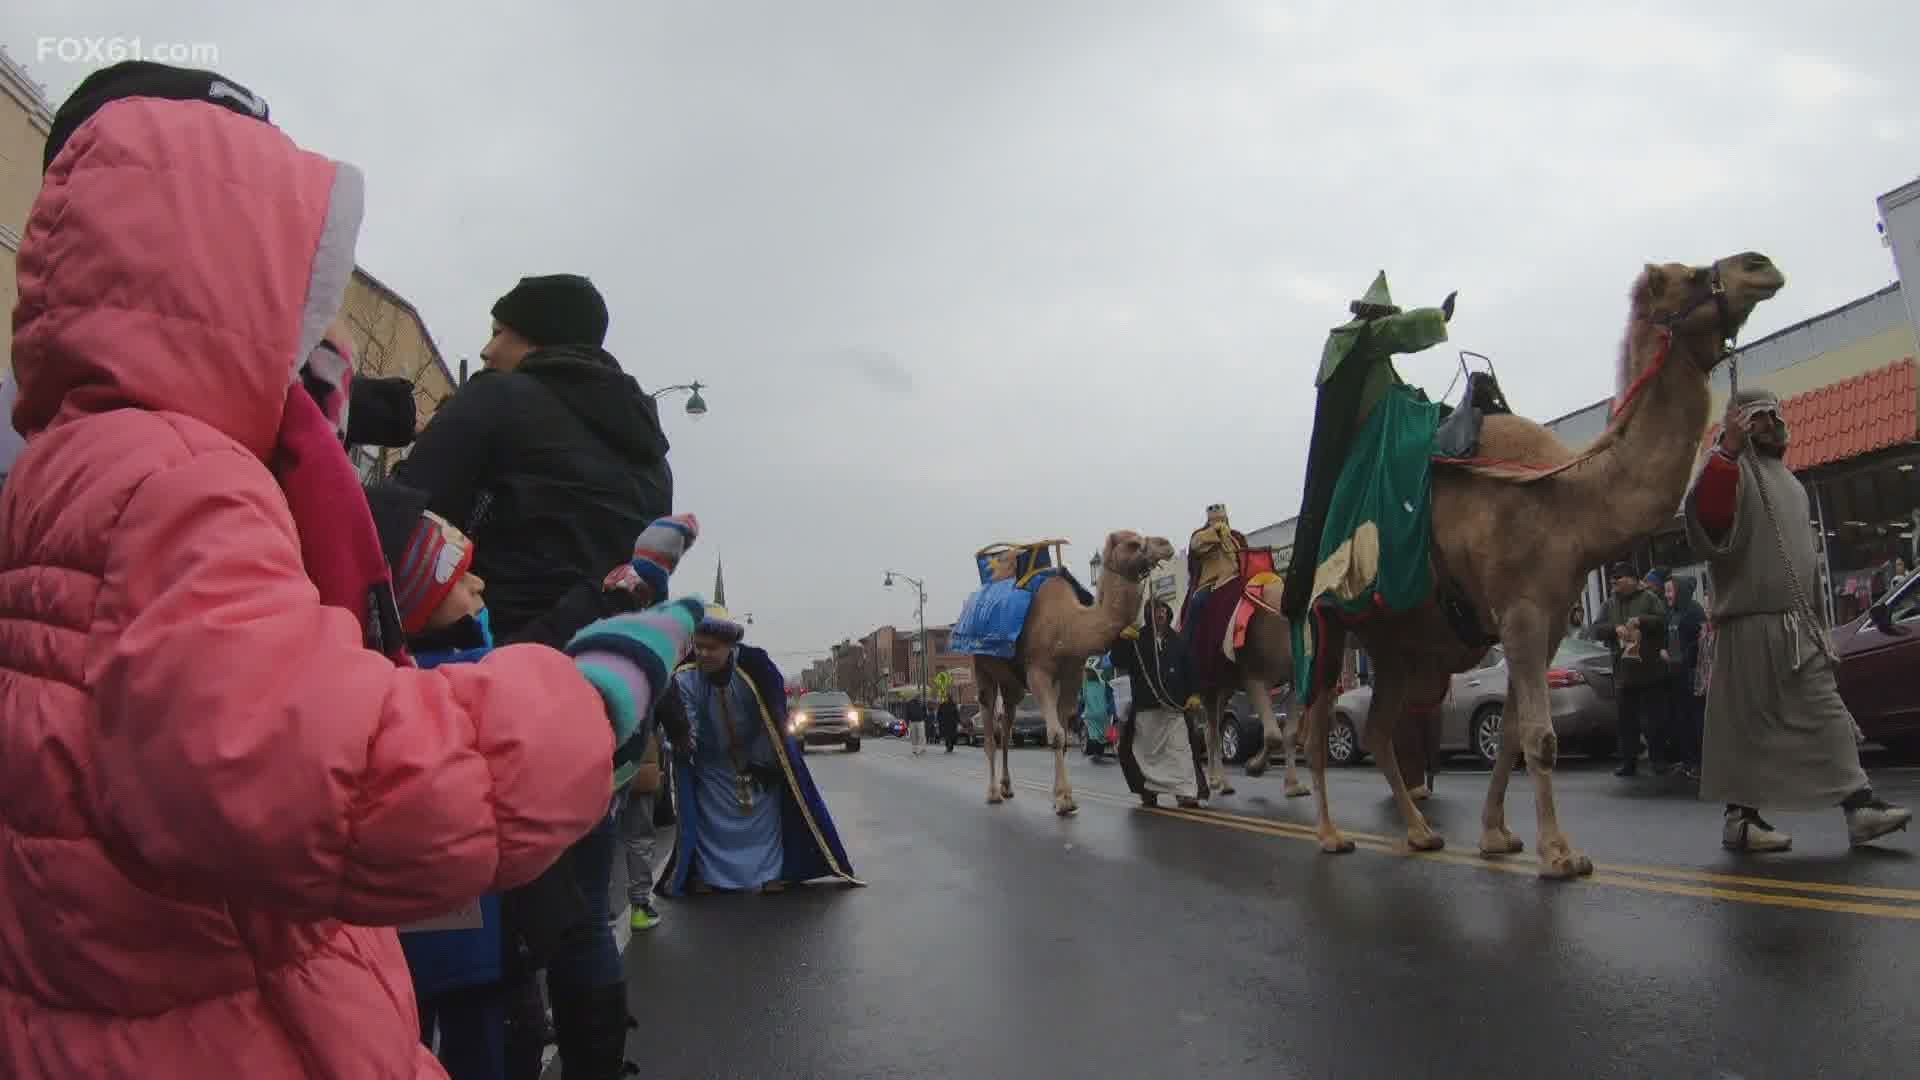 Kids and their families would line the streets, no matter how warm or cold to watch the three kings on their camels stroll by.